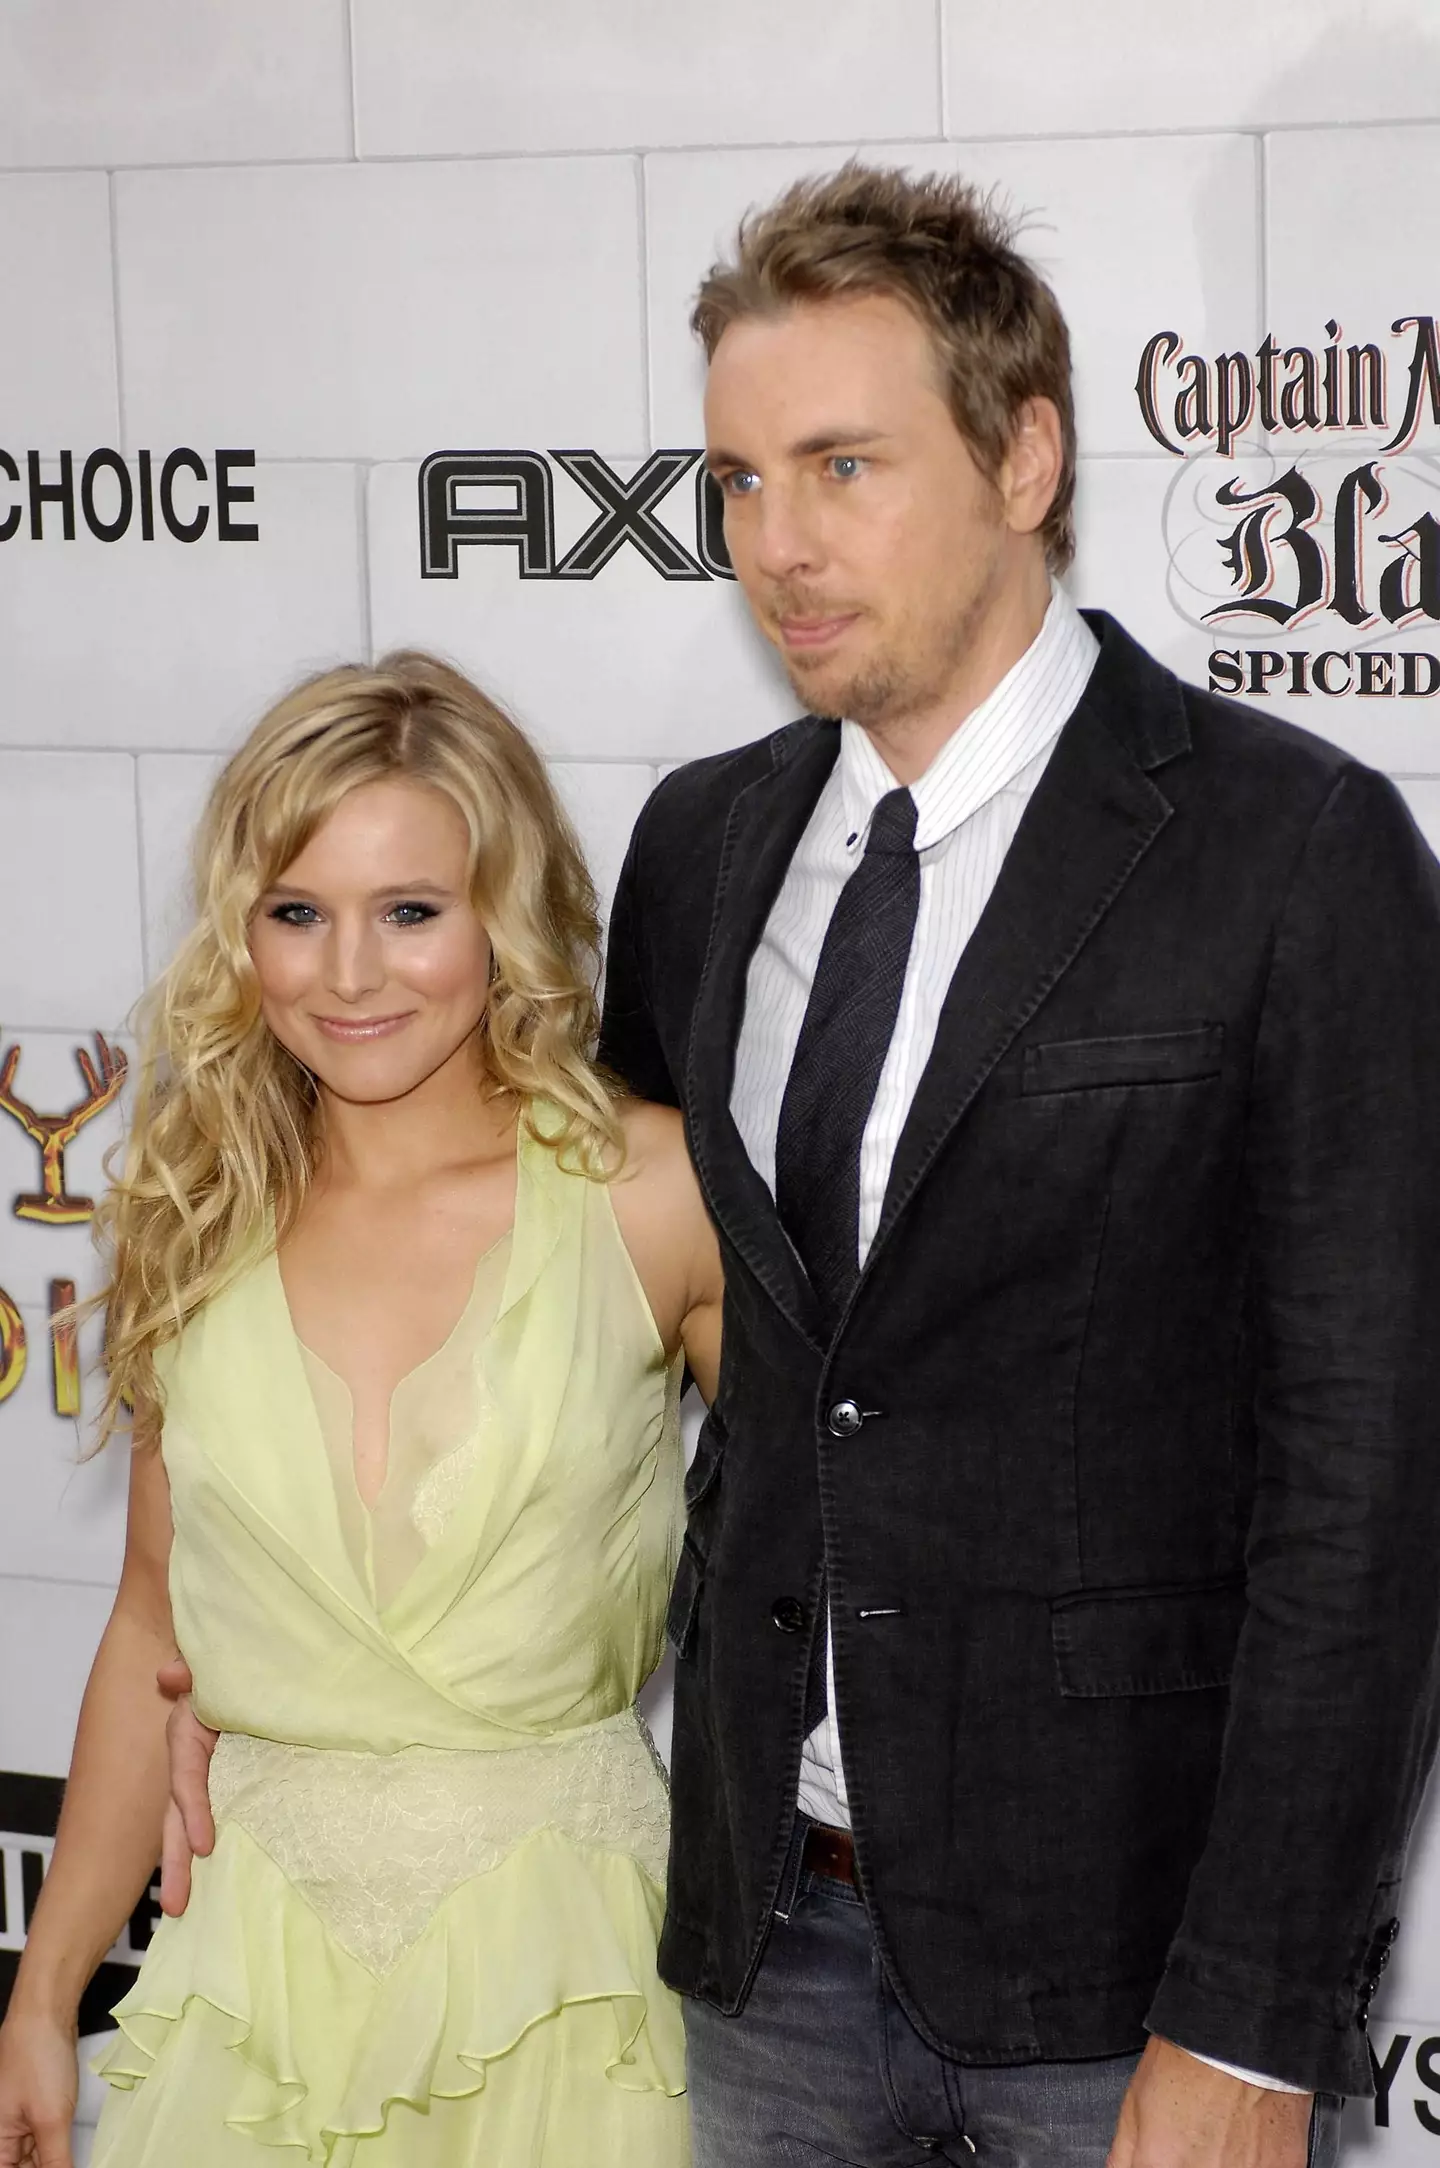 Kristen Bell and Dax Shepard have been married since 2013.